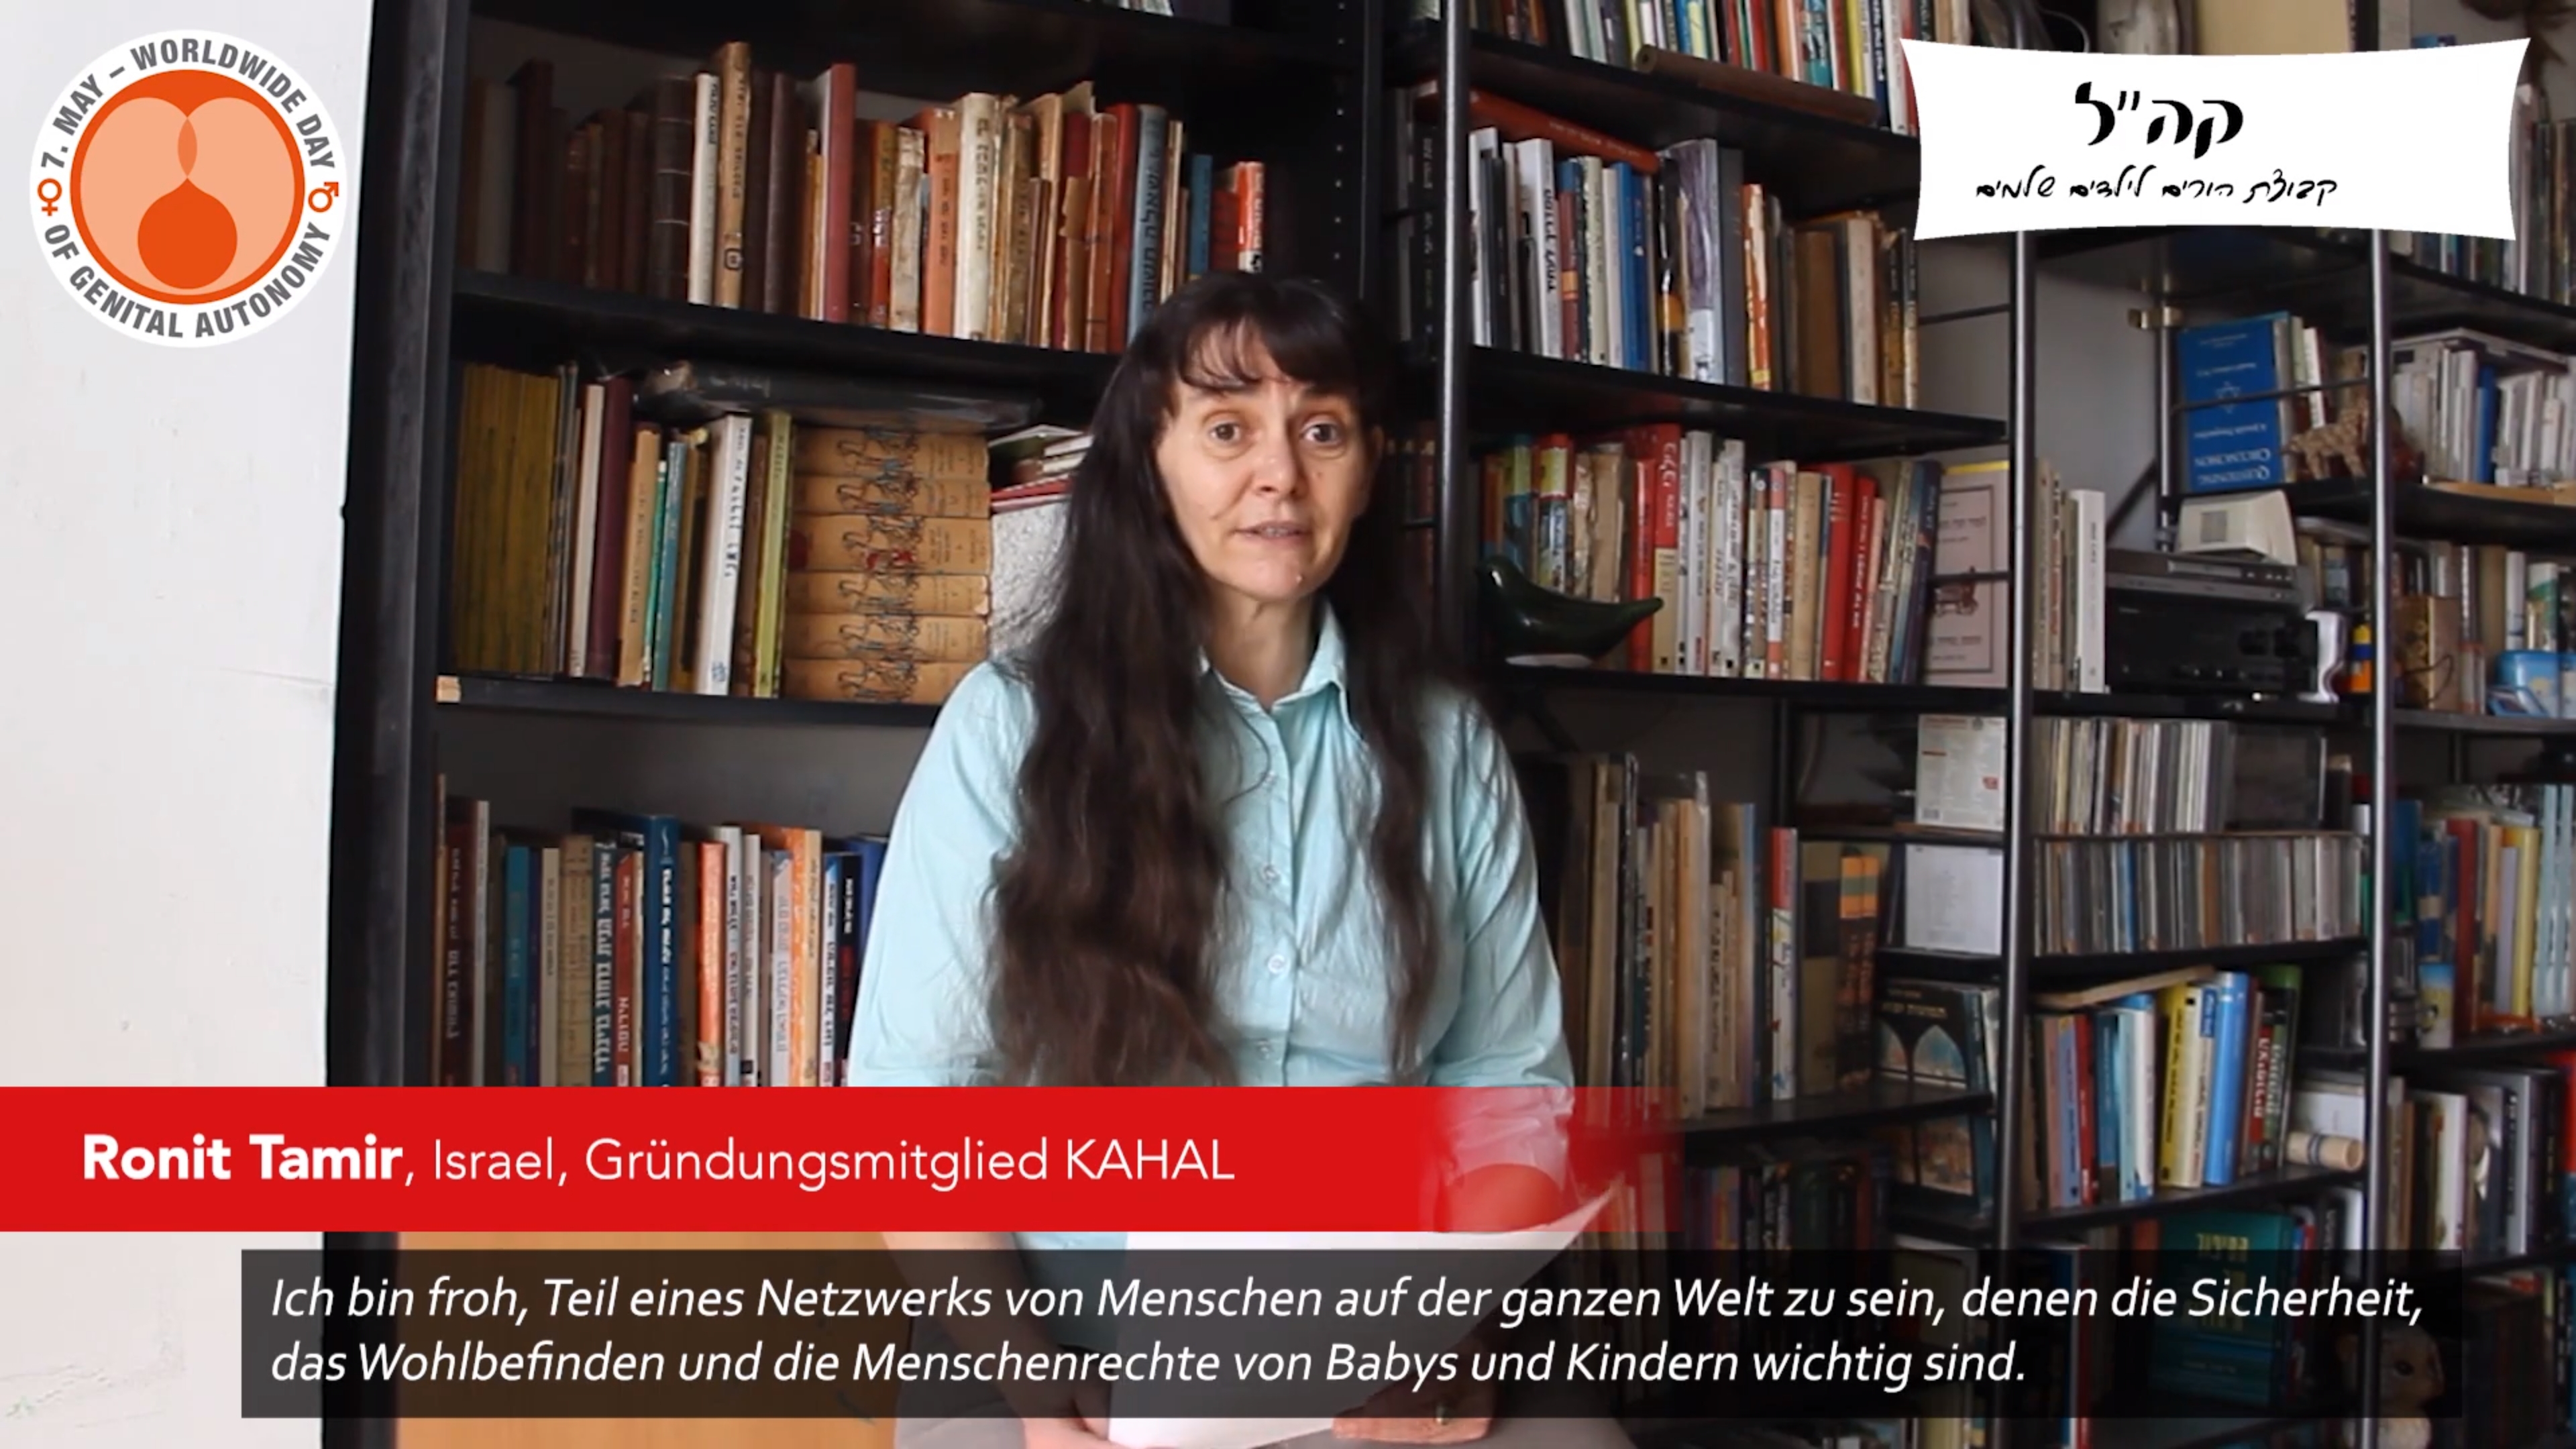 Ronit Tamir (KAHAL, Israel): "In the past 20 years KAHAL has helped many thousands of people get information, answers and support – to enable them to make an informed decision as to what should be done to their newborn baby."